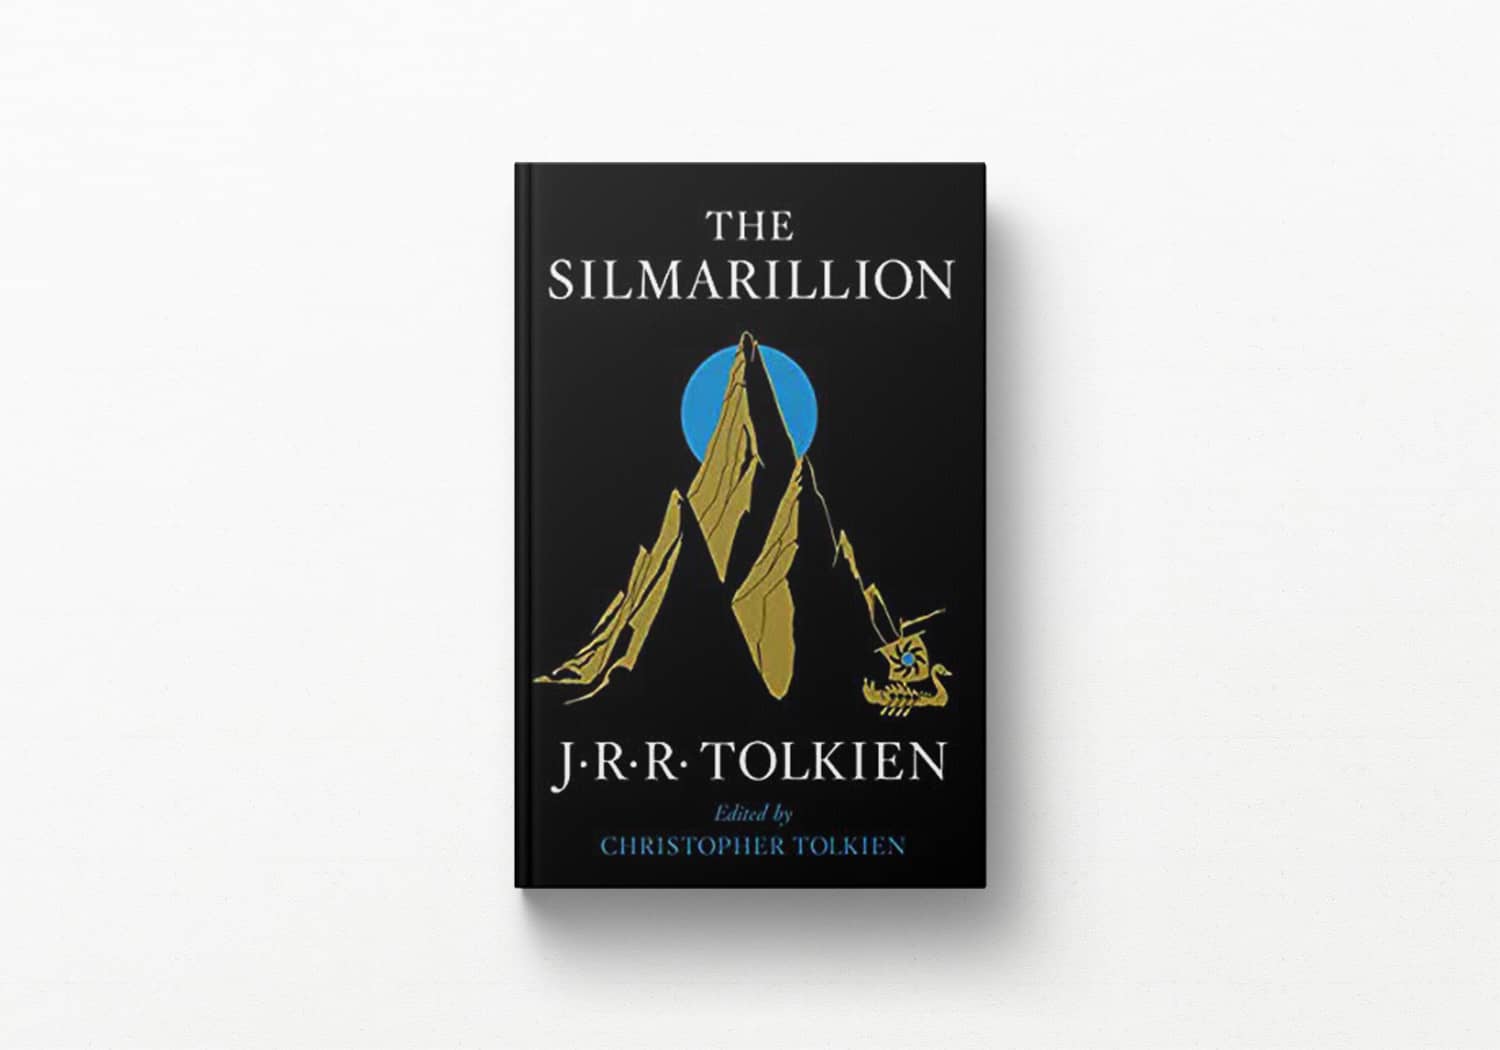 The Silmarillion - the original stories behind Amazon's Rings of Power